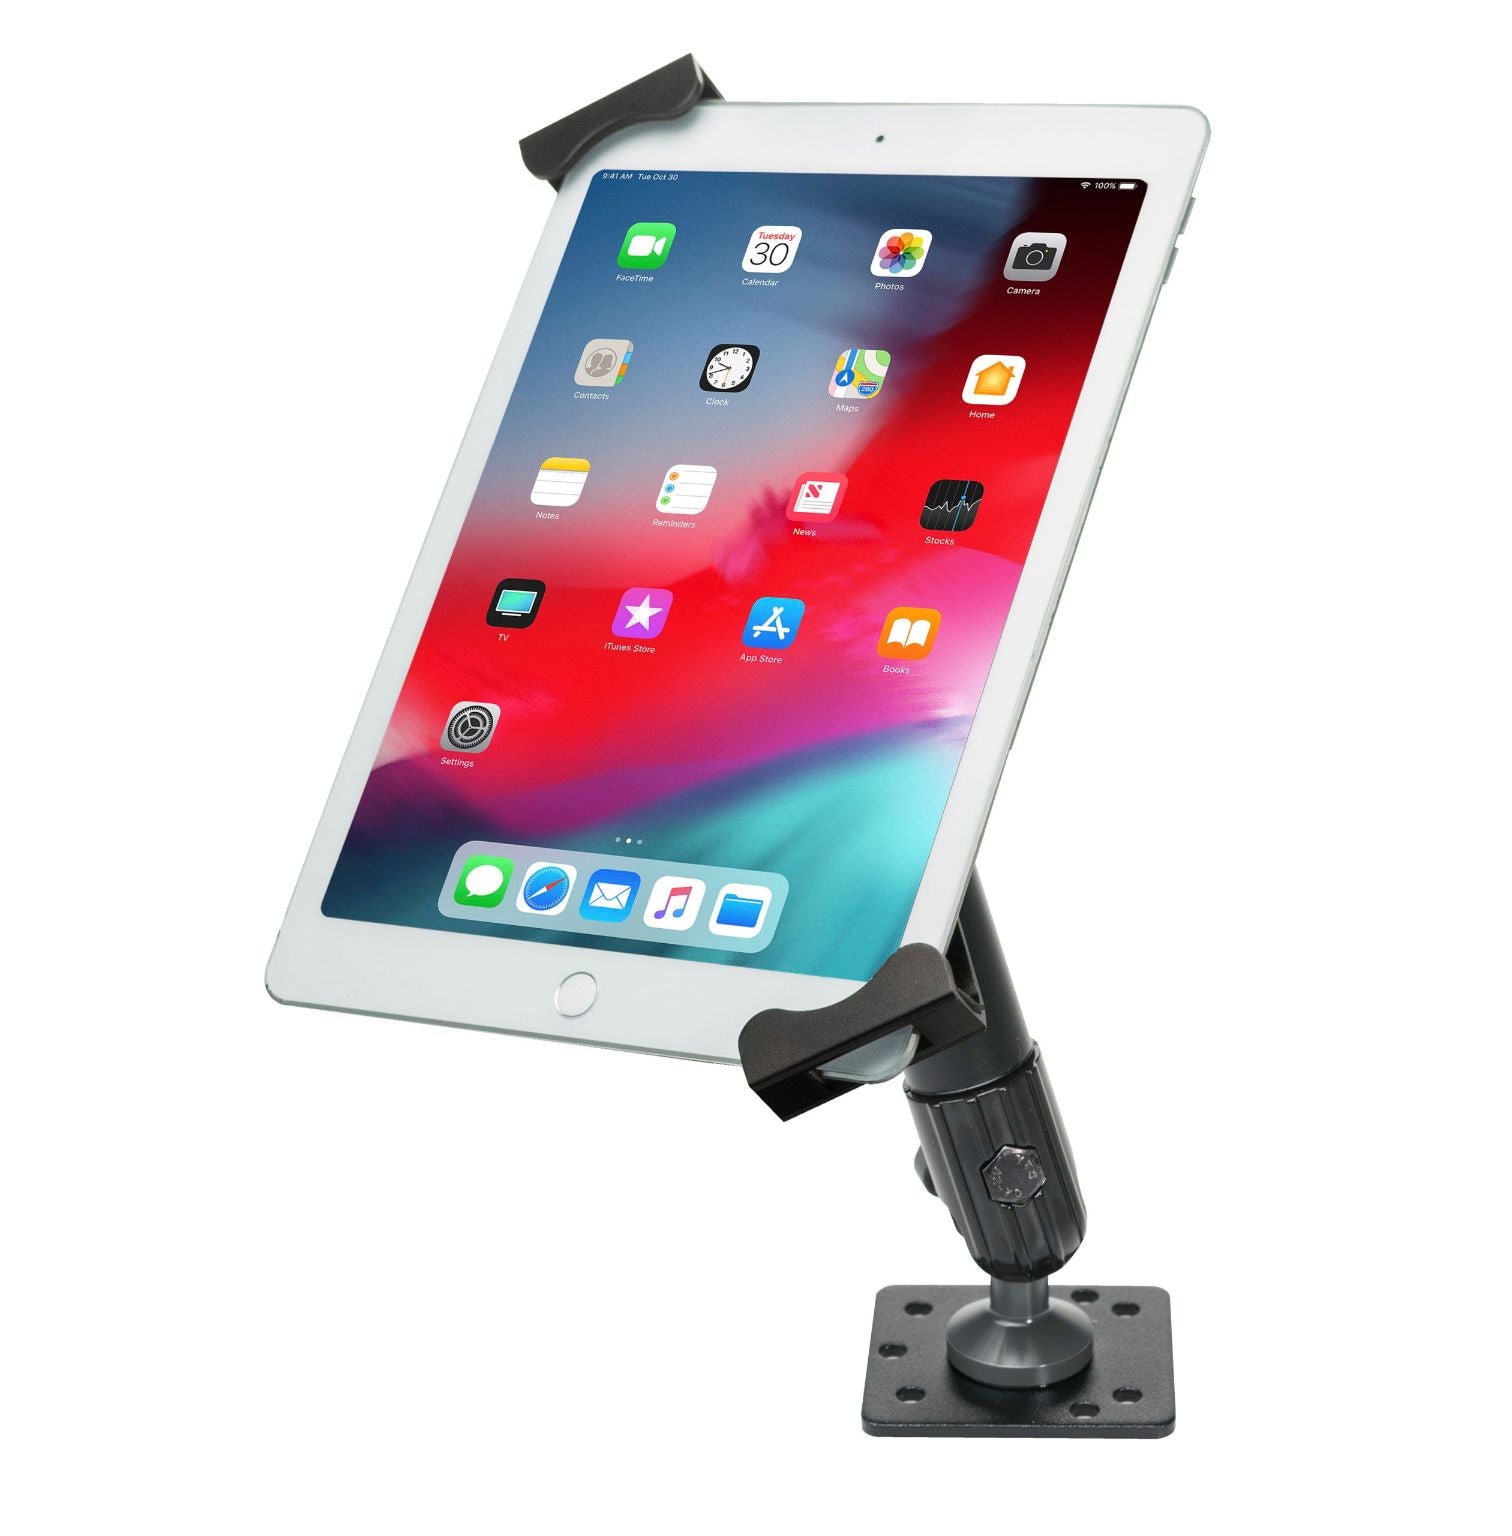 Security Vehicle Dashboard Mount for 7-14 Inch Tablets, including iPad 10.2-inch (7th/ 8th/ 9th Generation)